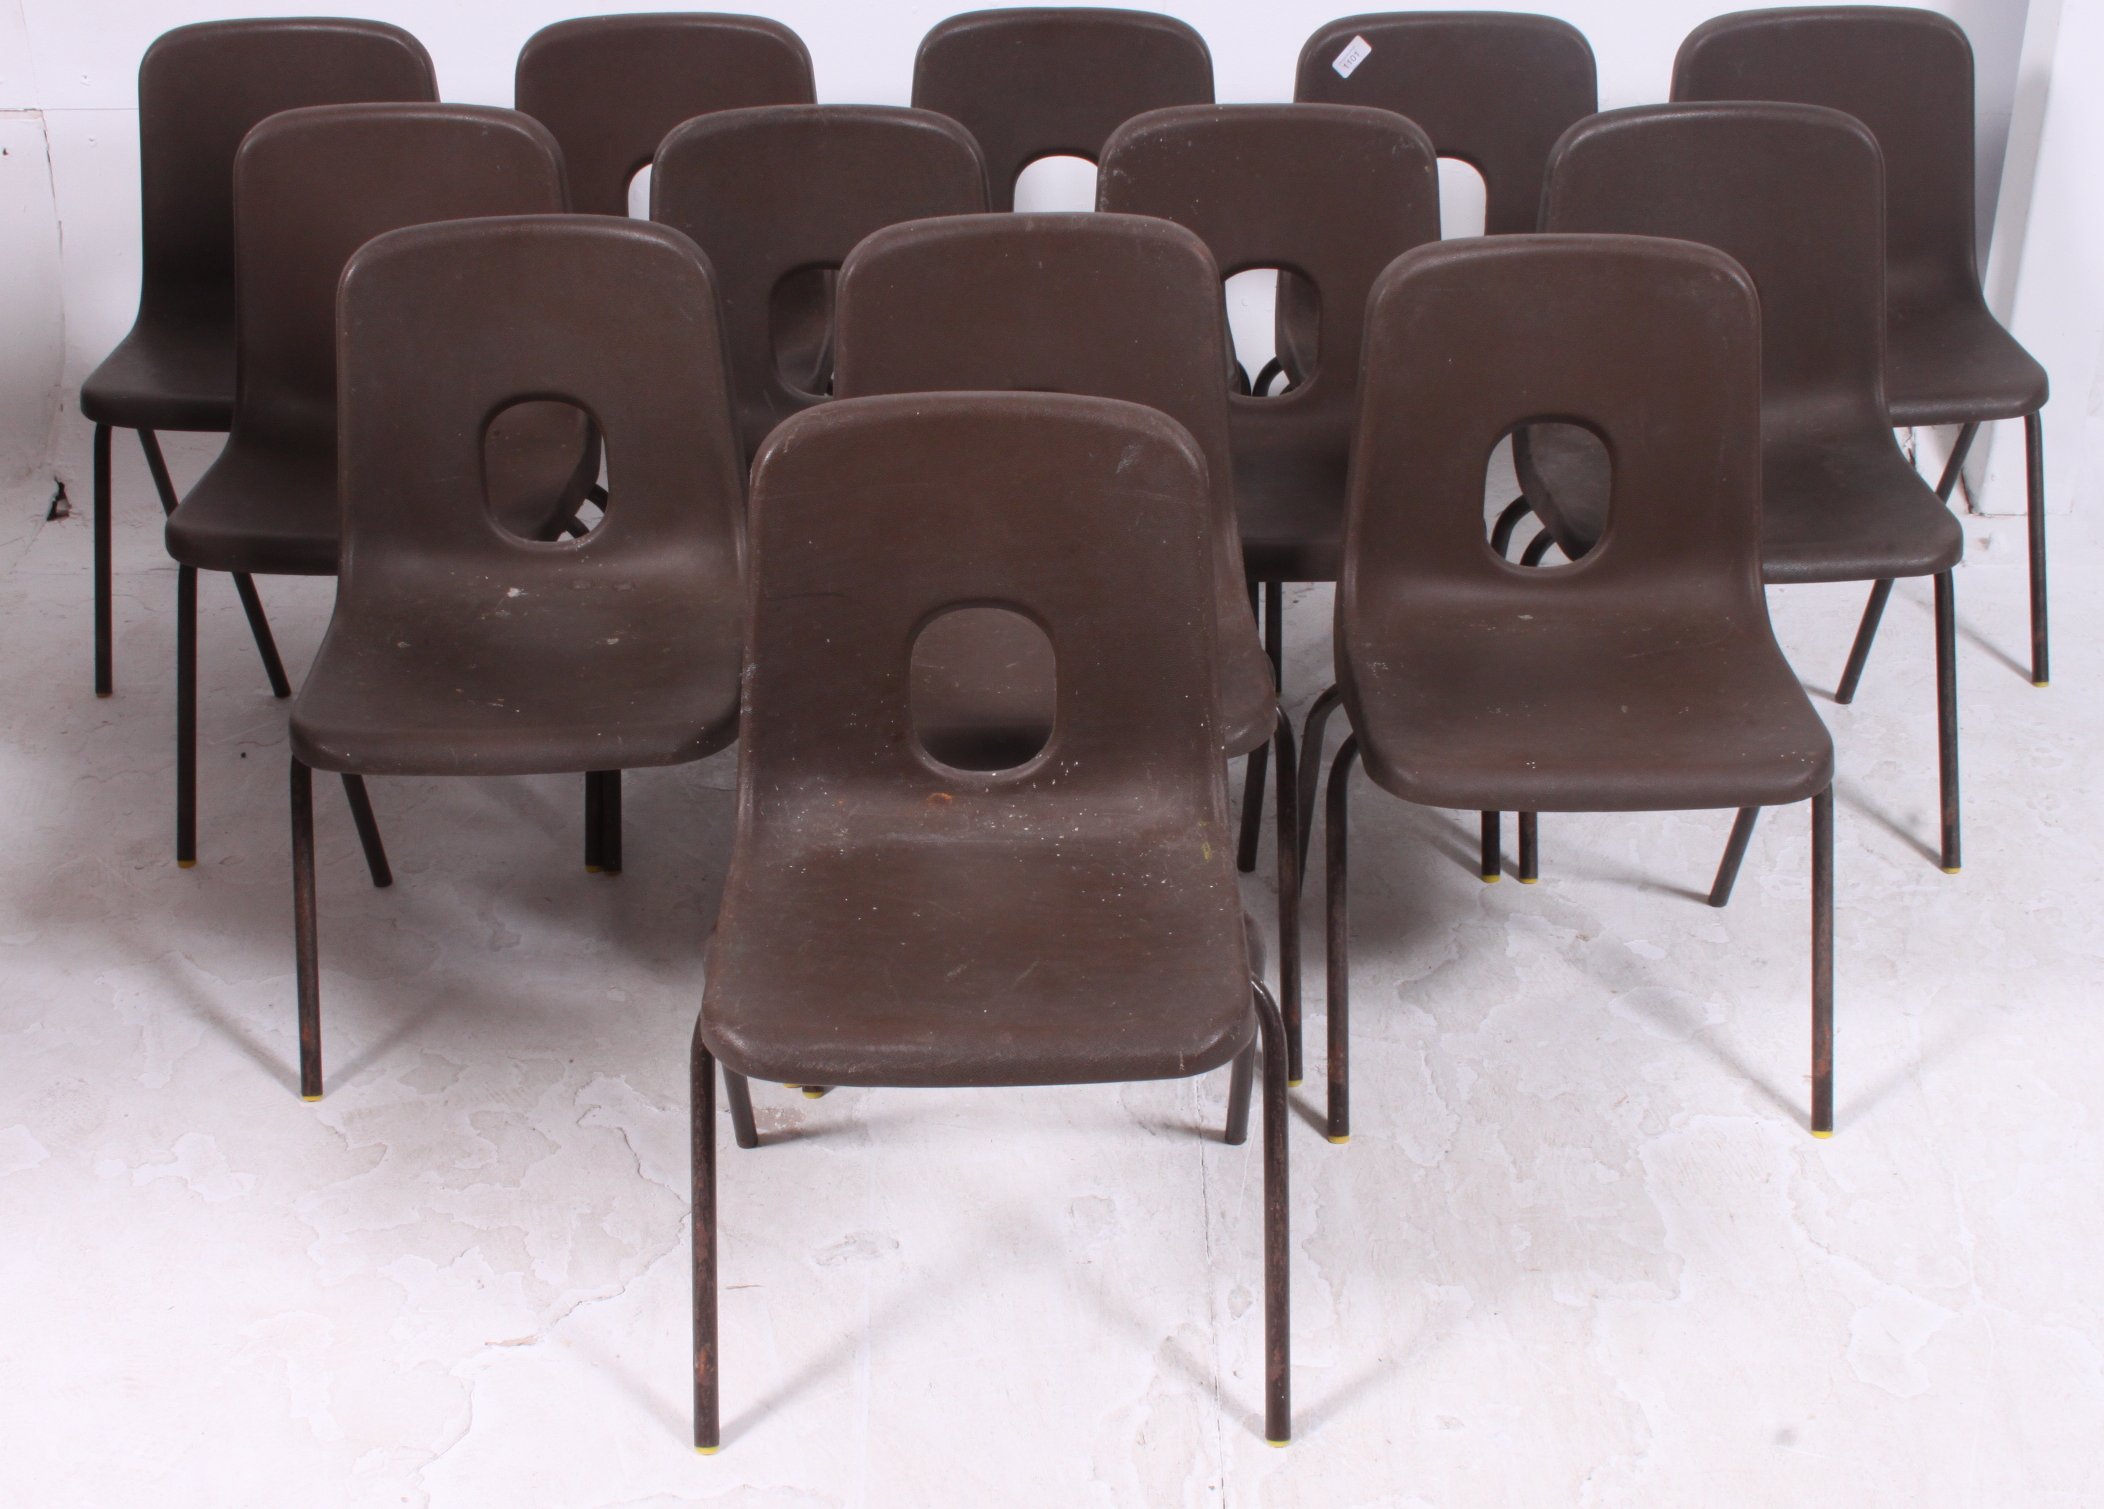 A stack of 13 vintage 1970's  Hille furniture plastic and tubular metal childrens school chairs. - Image 2 of 4